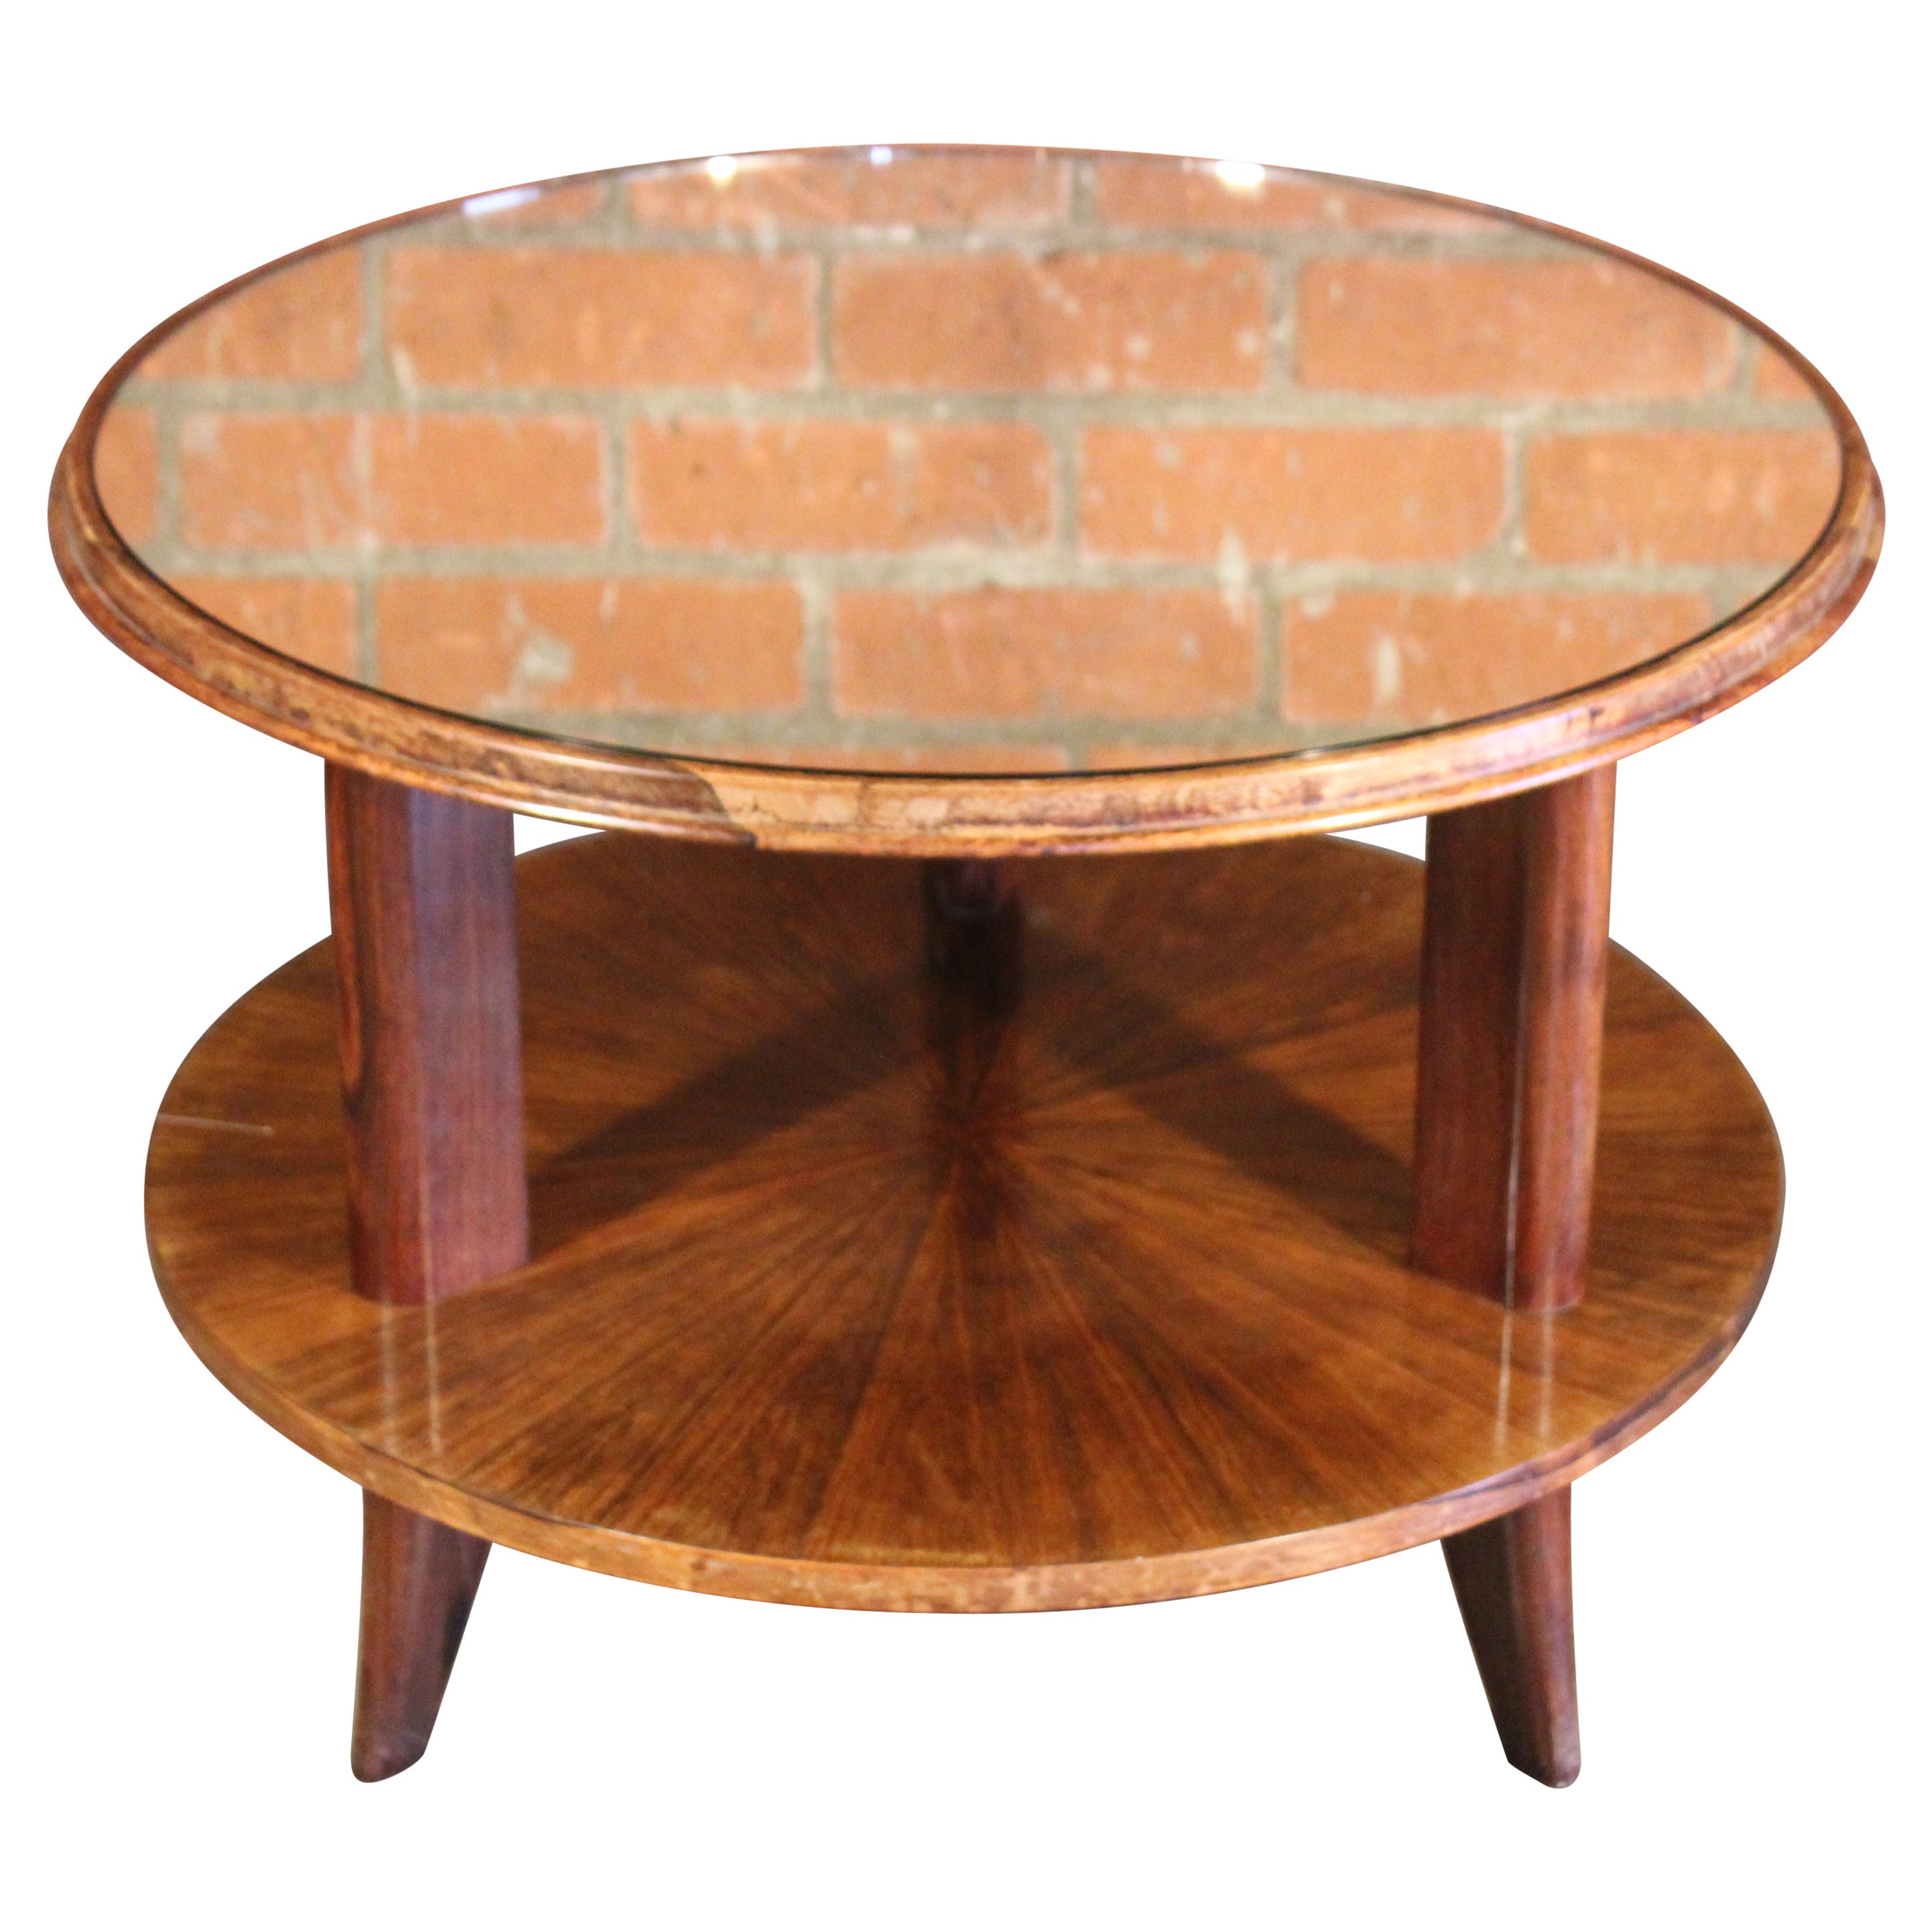 Art Deco Rosewood and Mirror Table Attributed to Paolo Buffa, Italy, 1940s For Sale